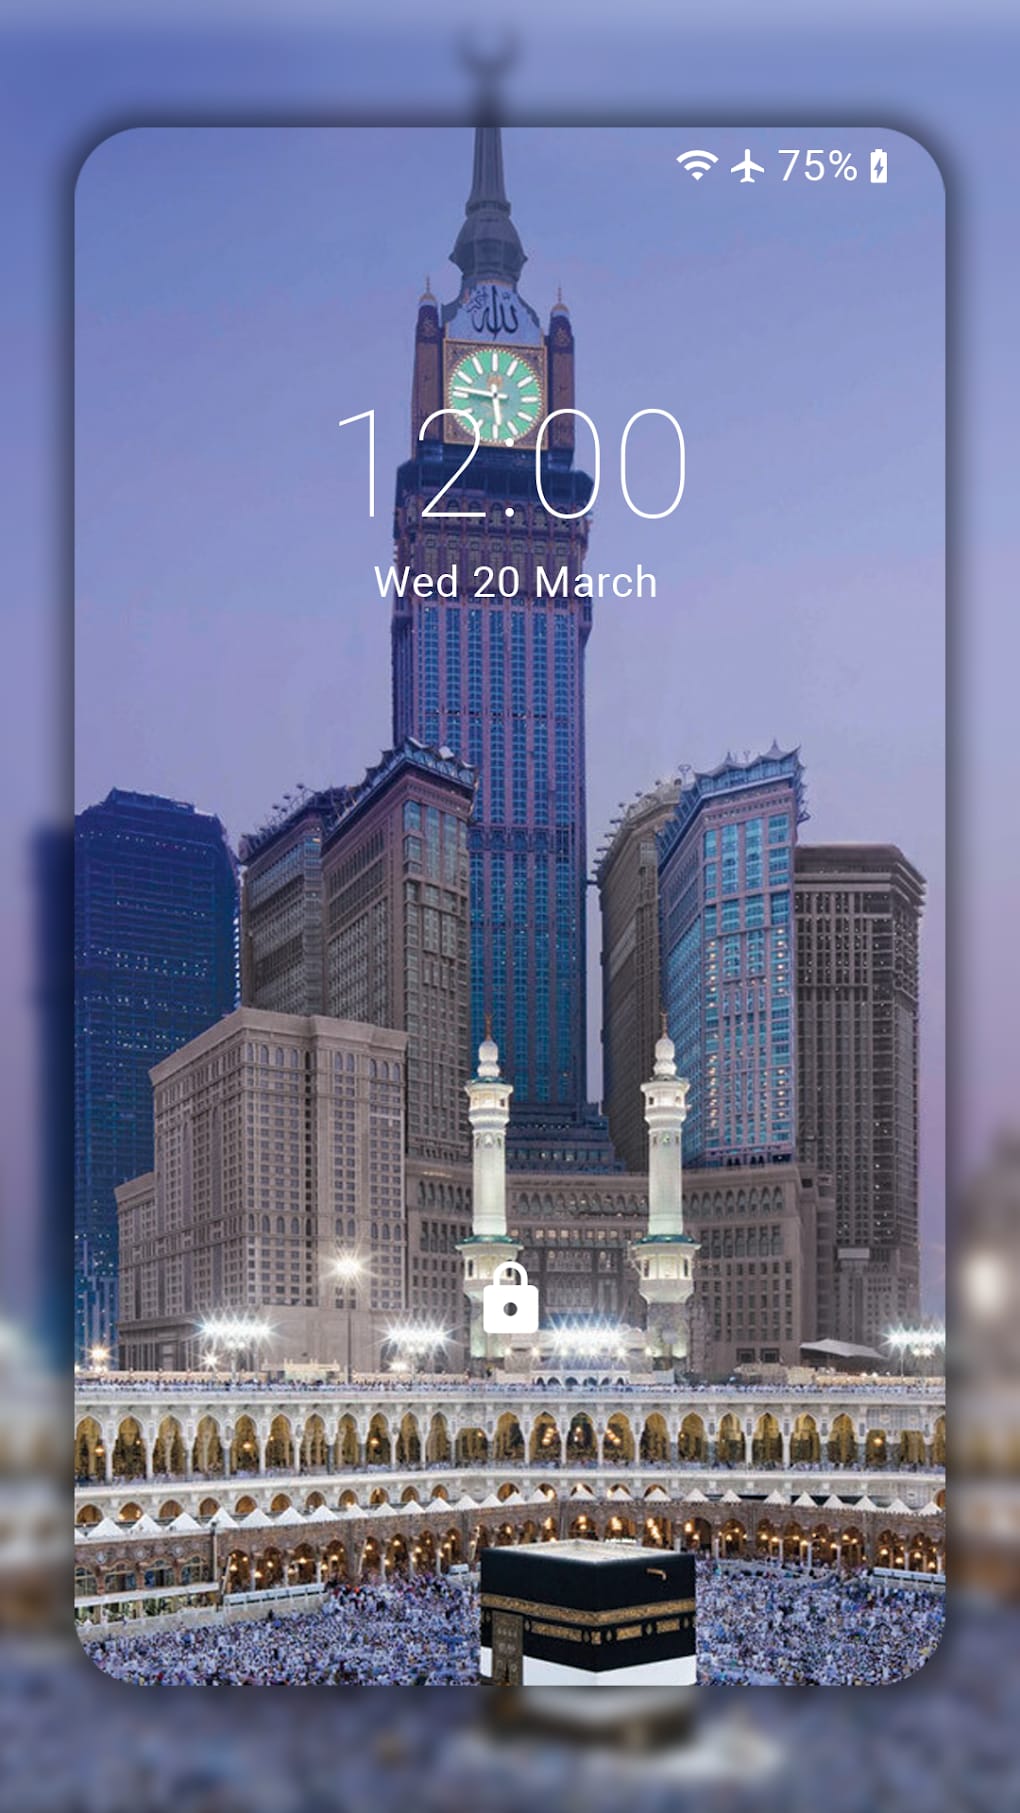 Kaaba Mecca Live Wallpaper islamic background Android 